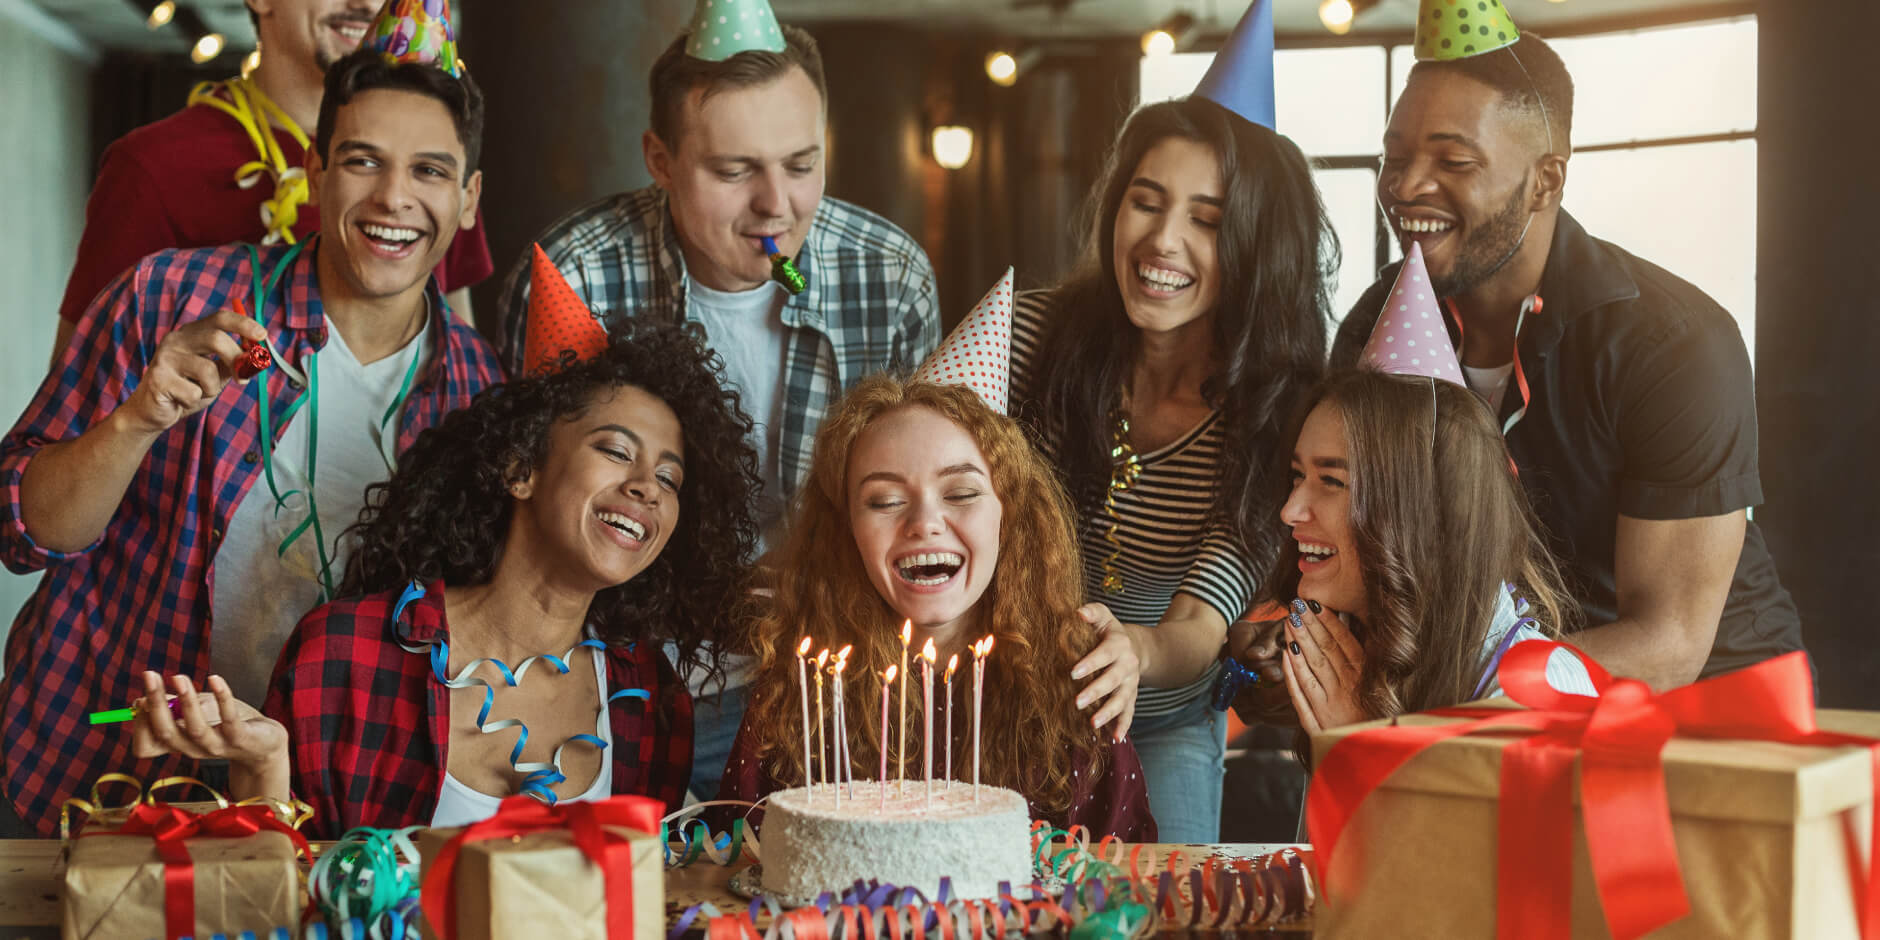 Top Tips for Hosting an Adult Birthday Bash